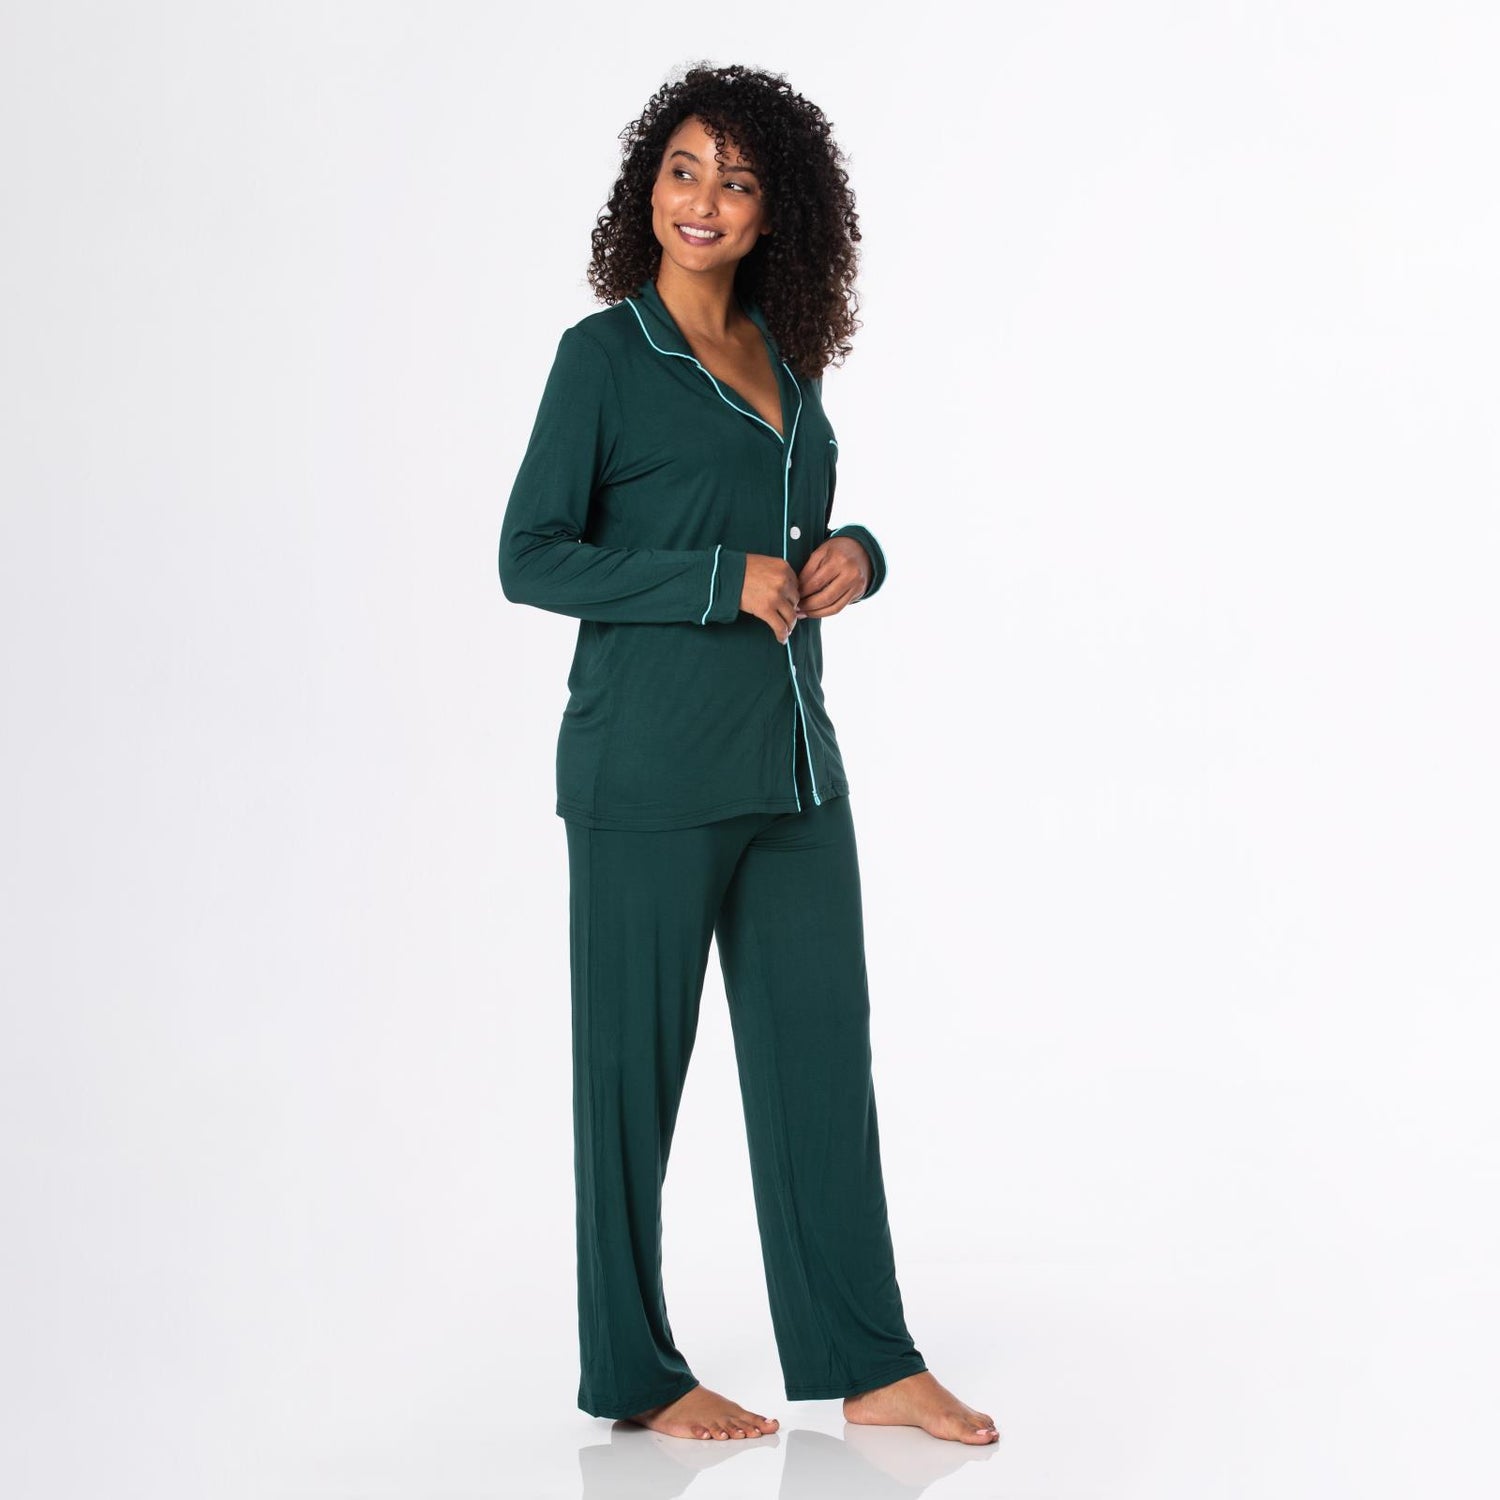 Women's Long Sleeved Collared Pajama Set in Pine with Iceberg